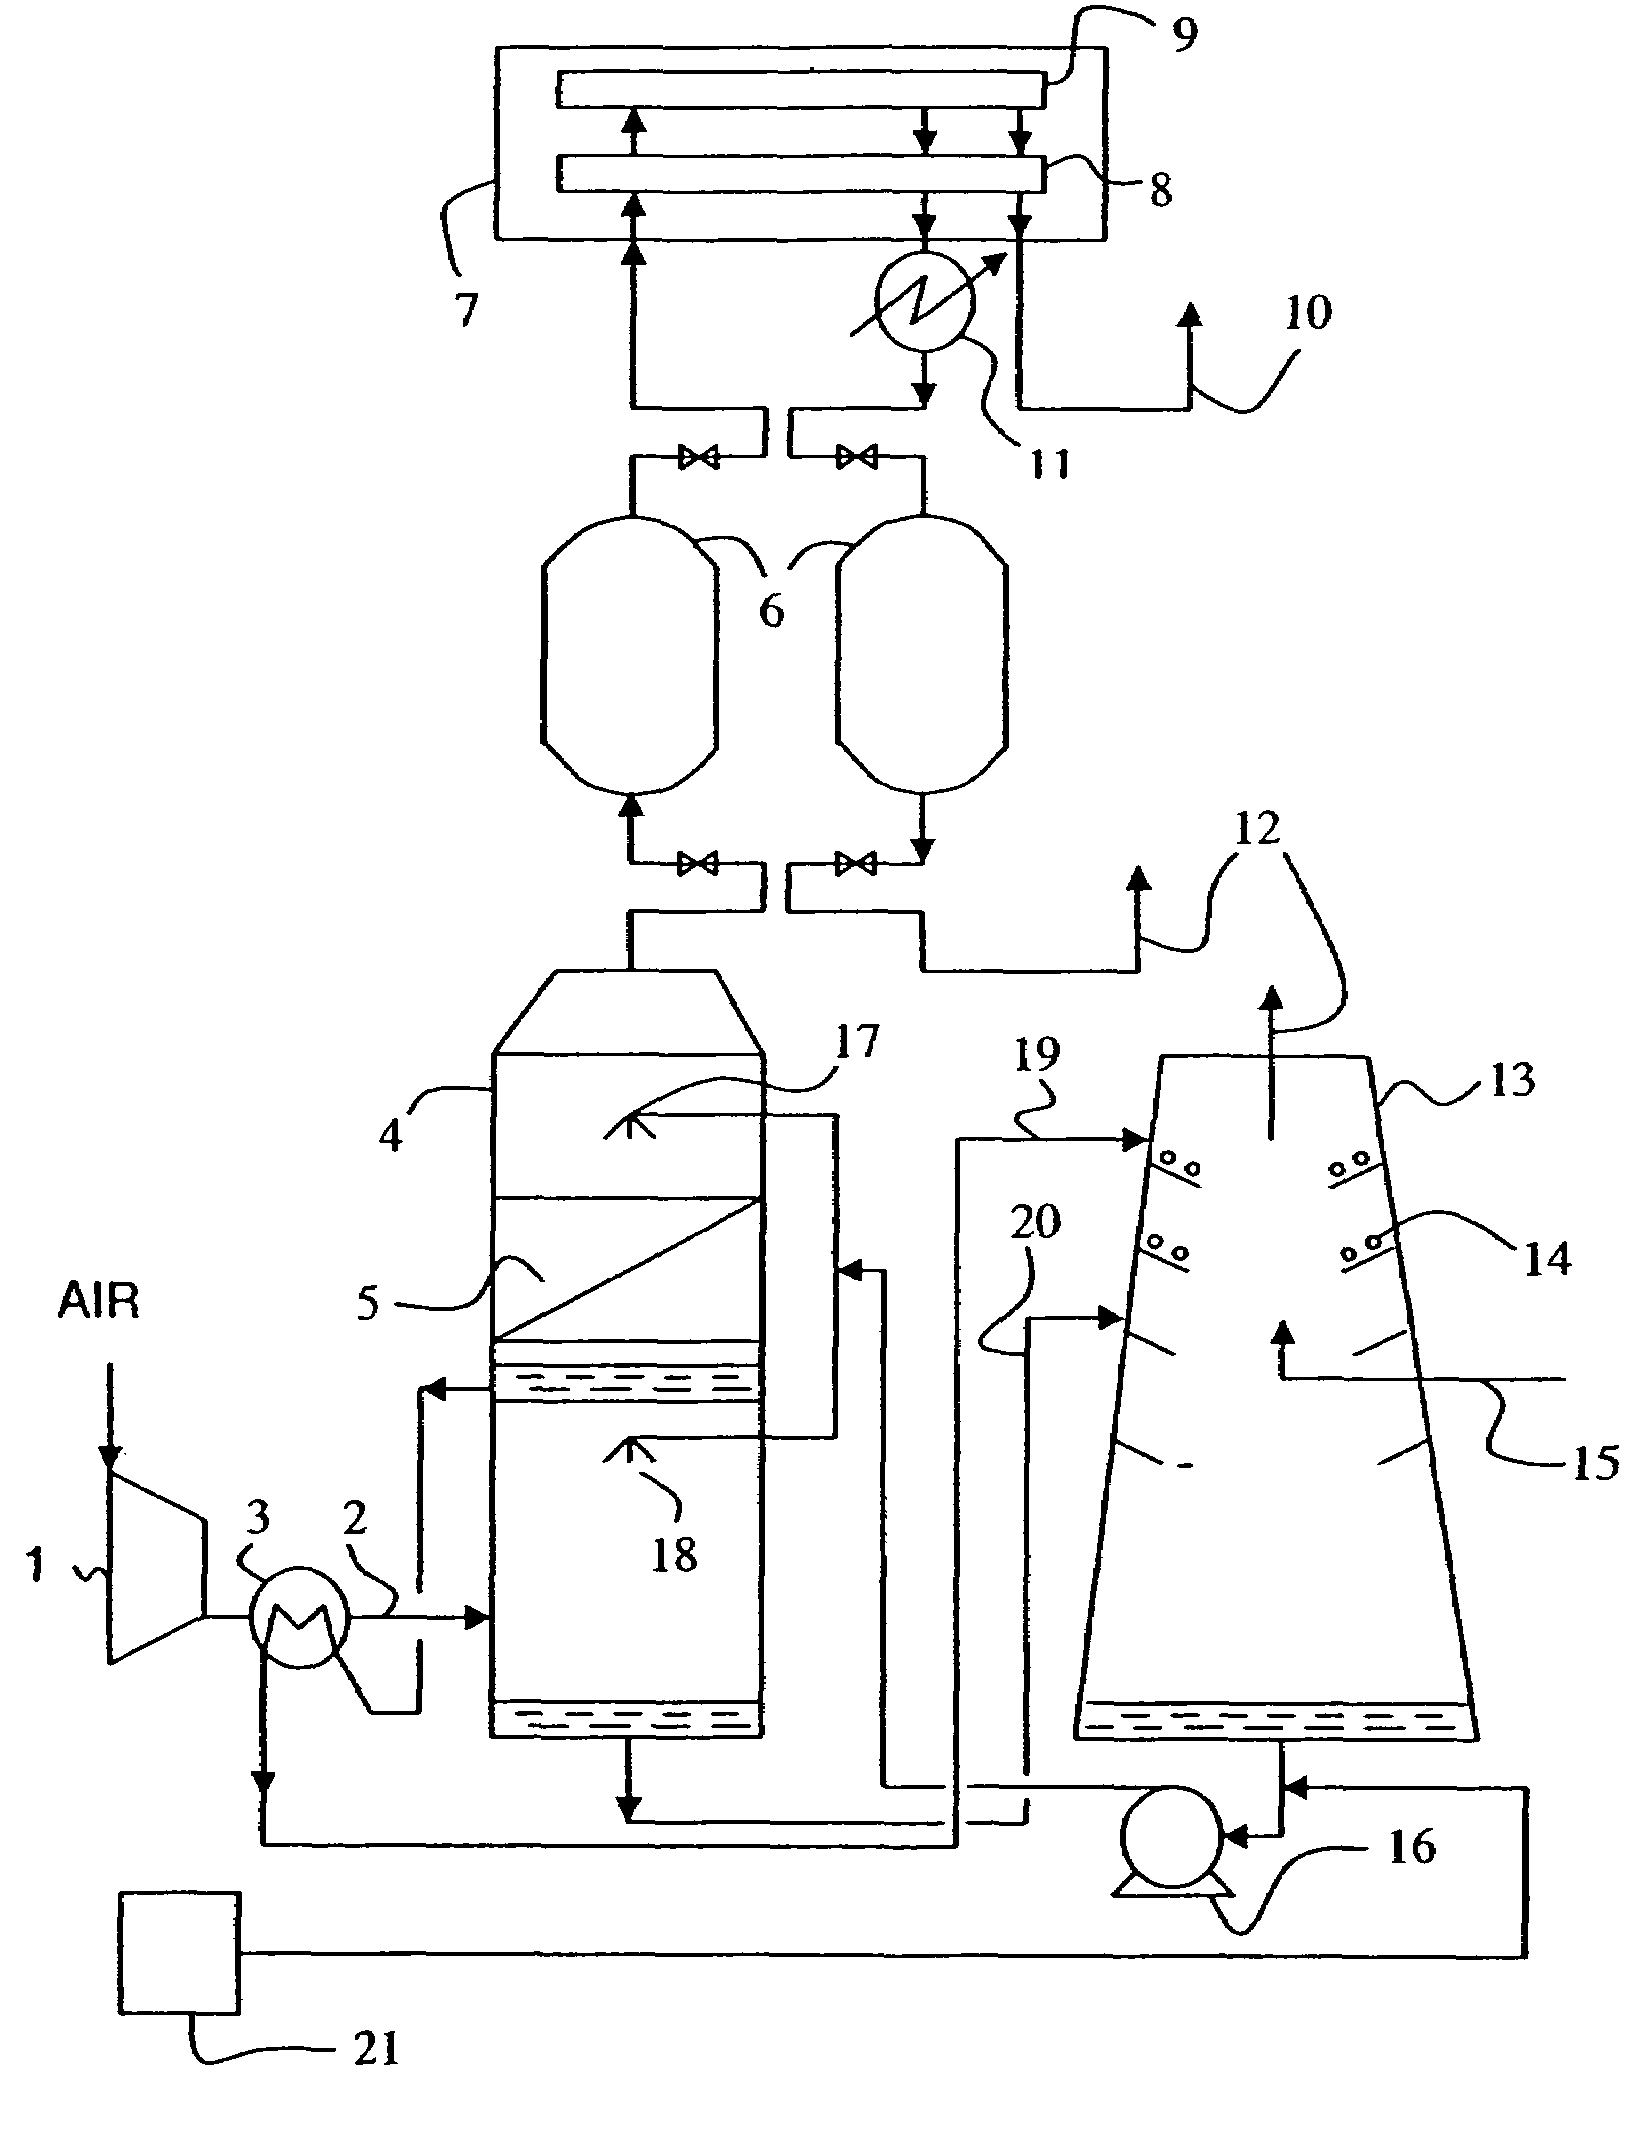 Process and installation for the fractionation of air into specific gases